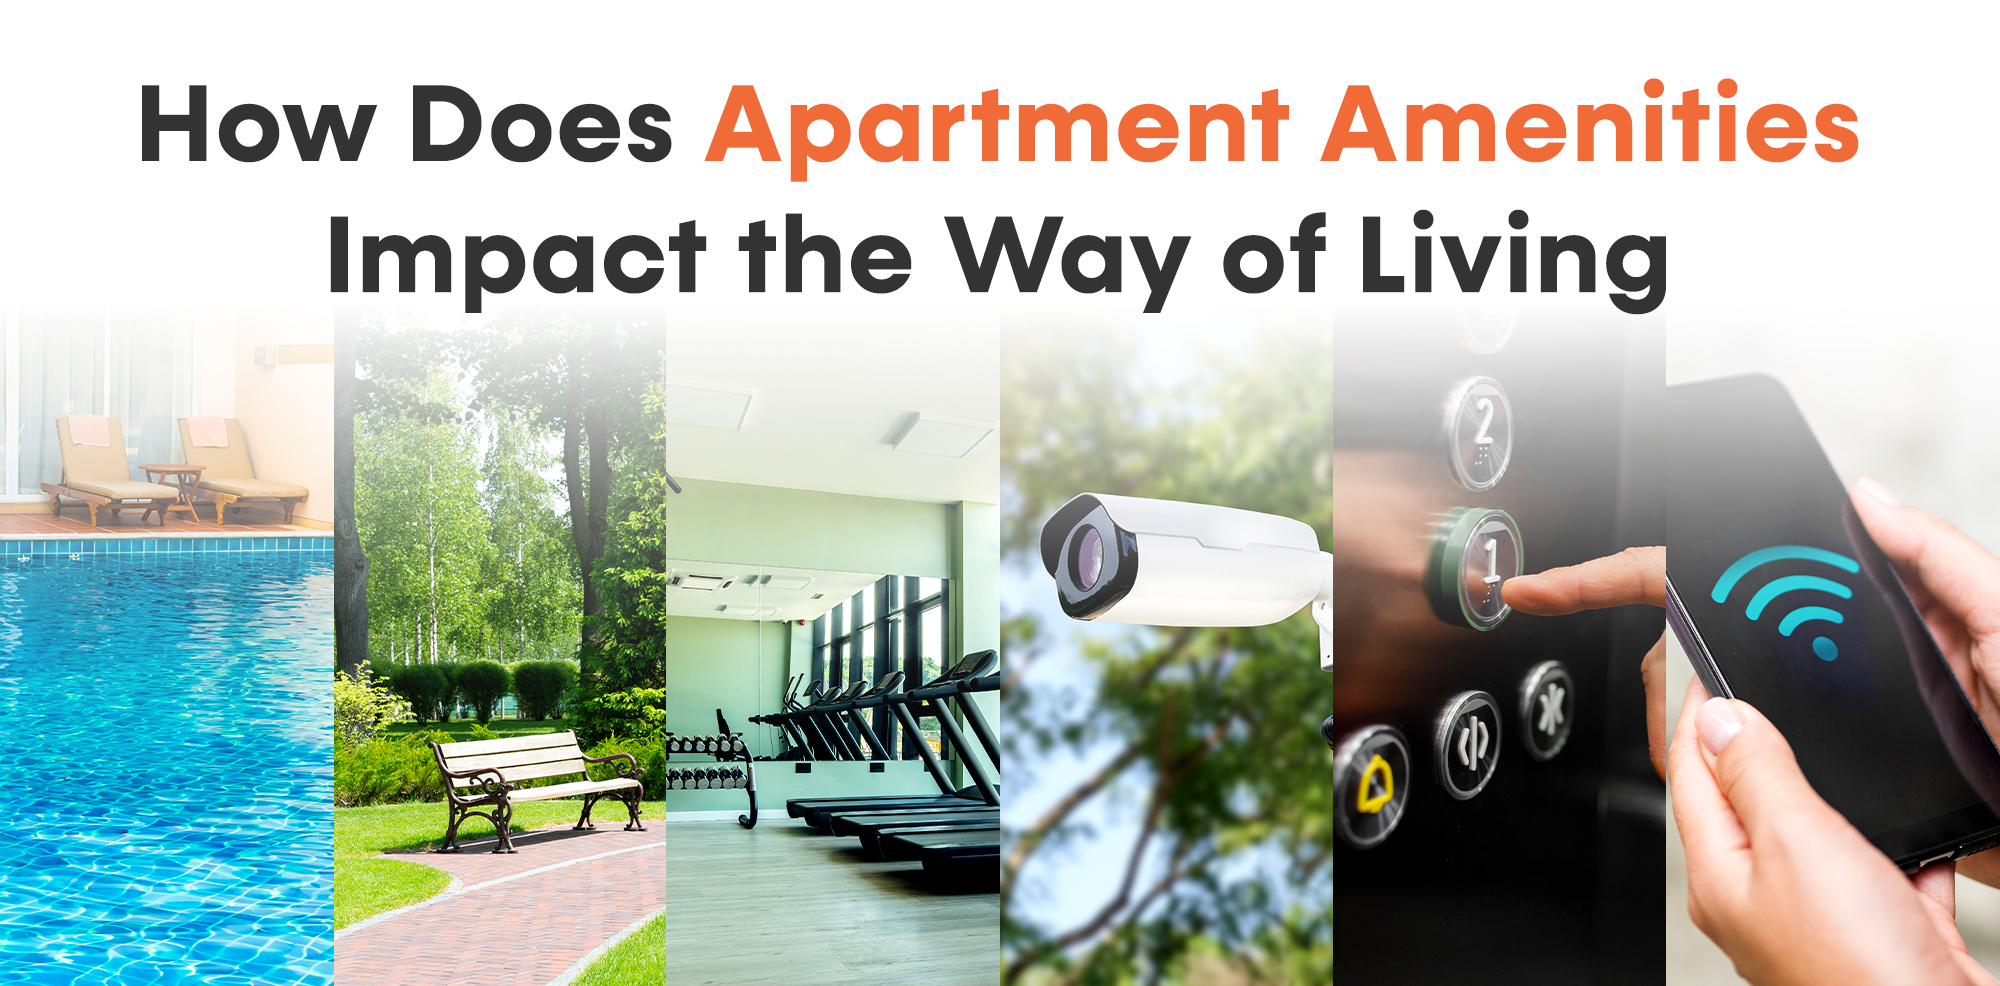 How Does Apartment Amenities Impact the Way of Living